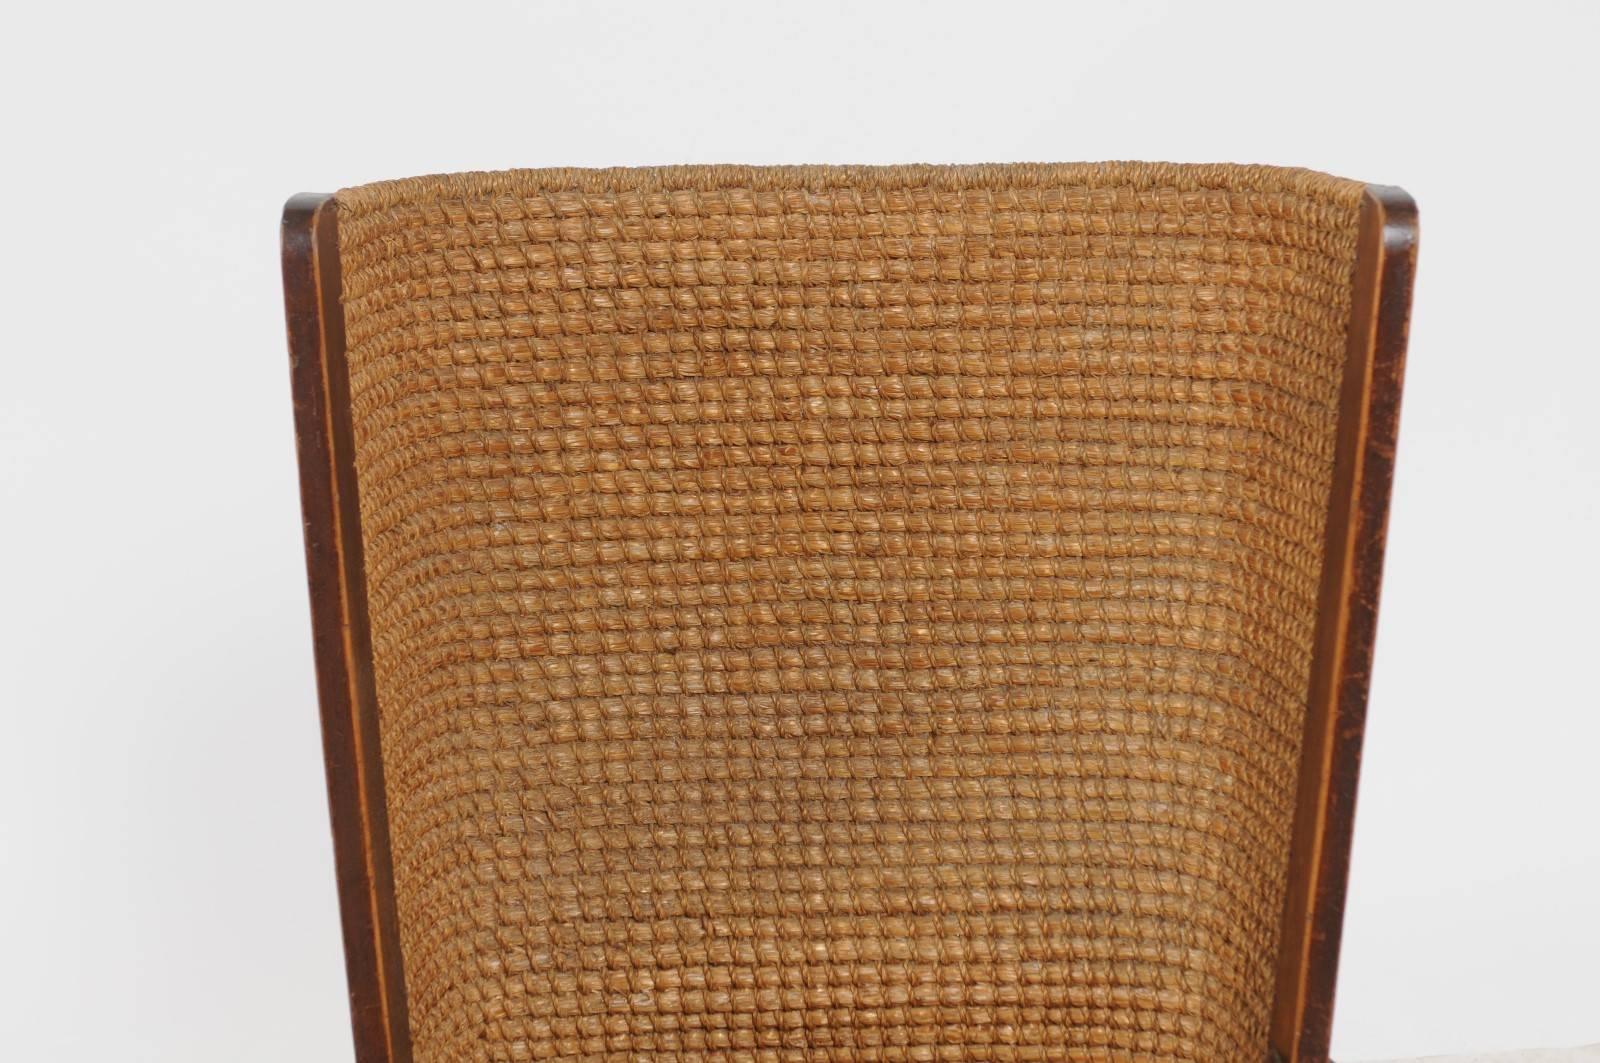 Scottish Late 19th Century Orkney Chair with Wraparound Handwoven Straw Back 5